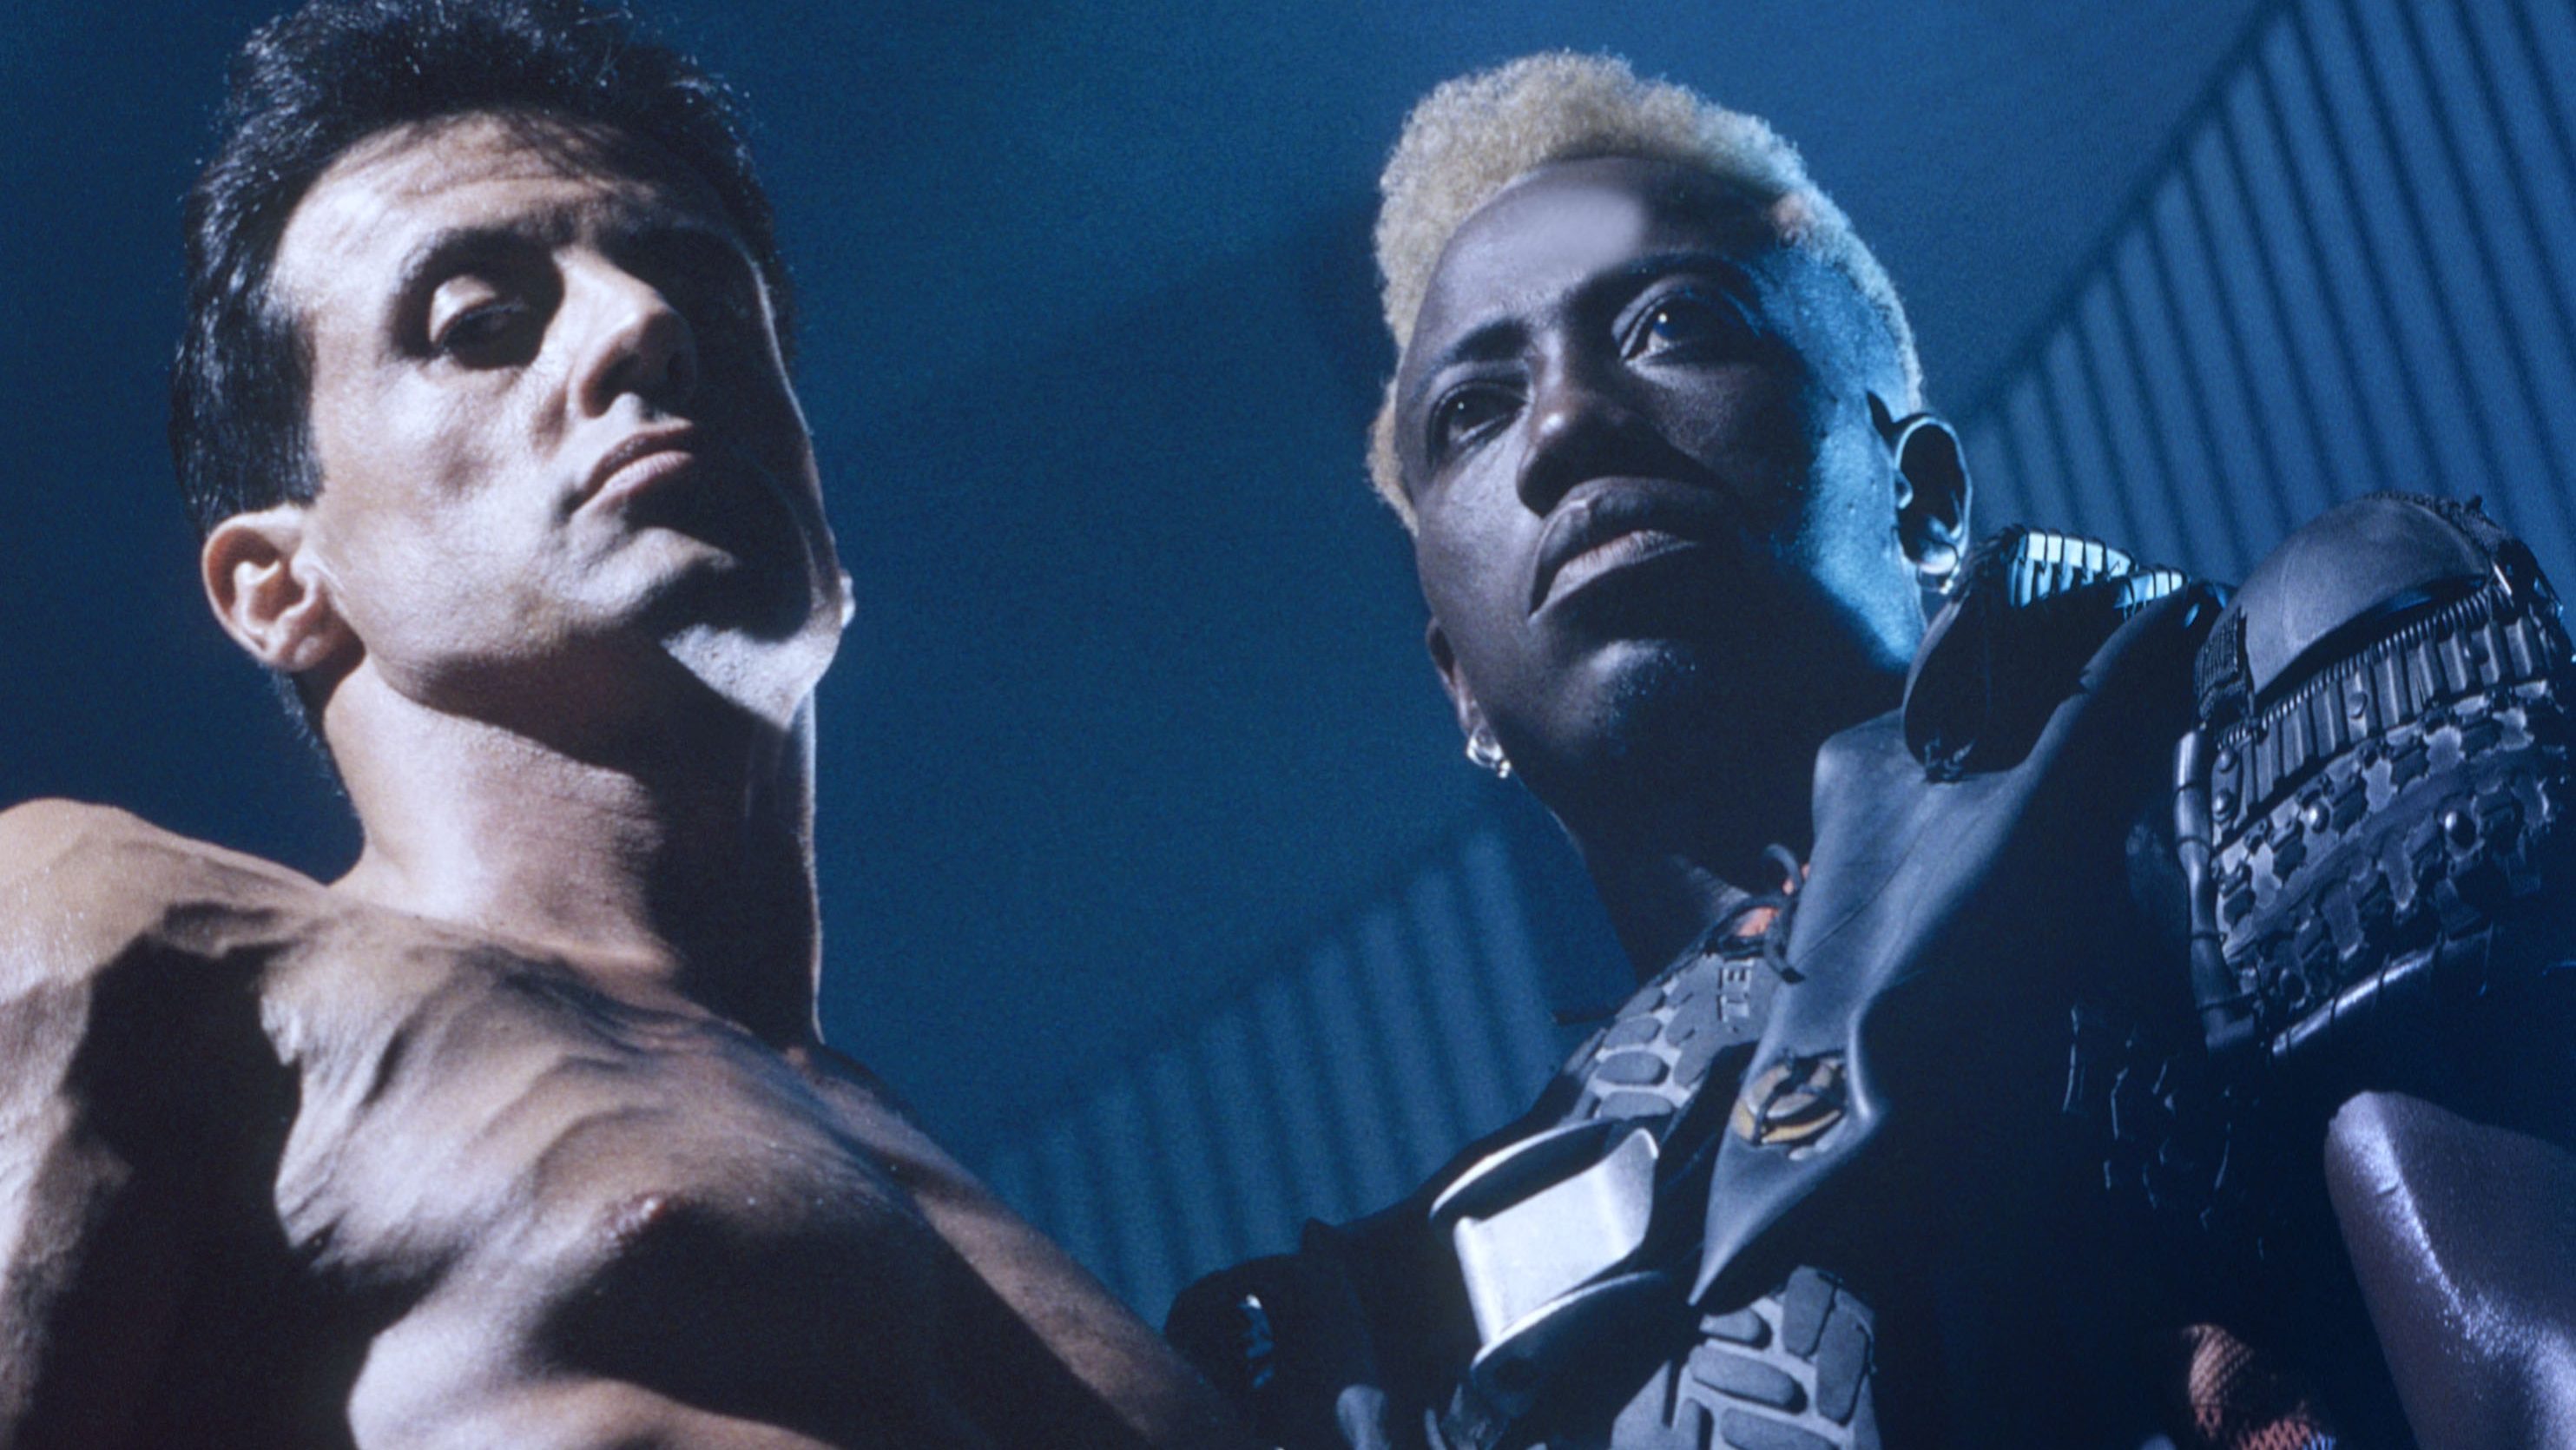 Los Angeles - CIRCA 1993:  Actors Sylvester Stallone and Wesley Snipes stars of the movie Demolition Man pose for a portrait circa 1993 in Los Angeles, California  (Photo by Aaron Rapoport/Corbis/Getty Images)